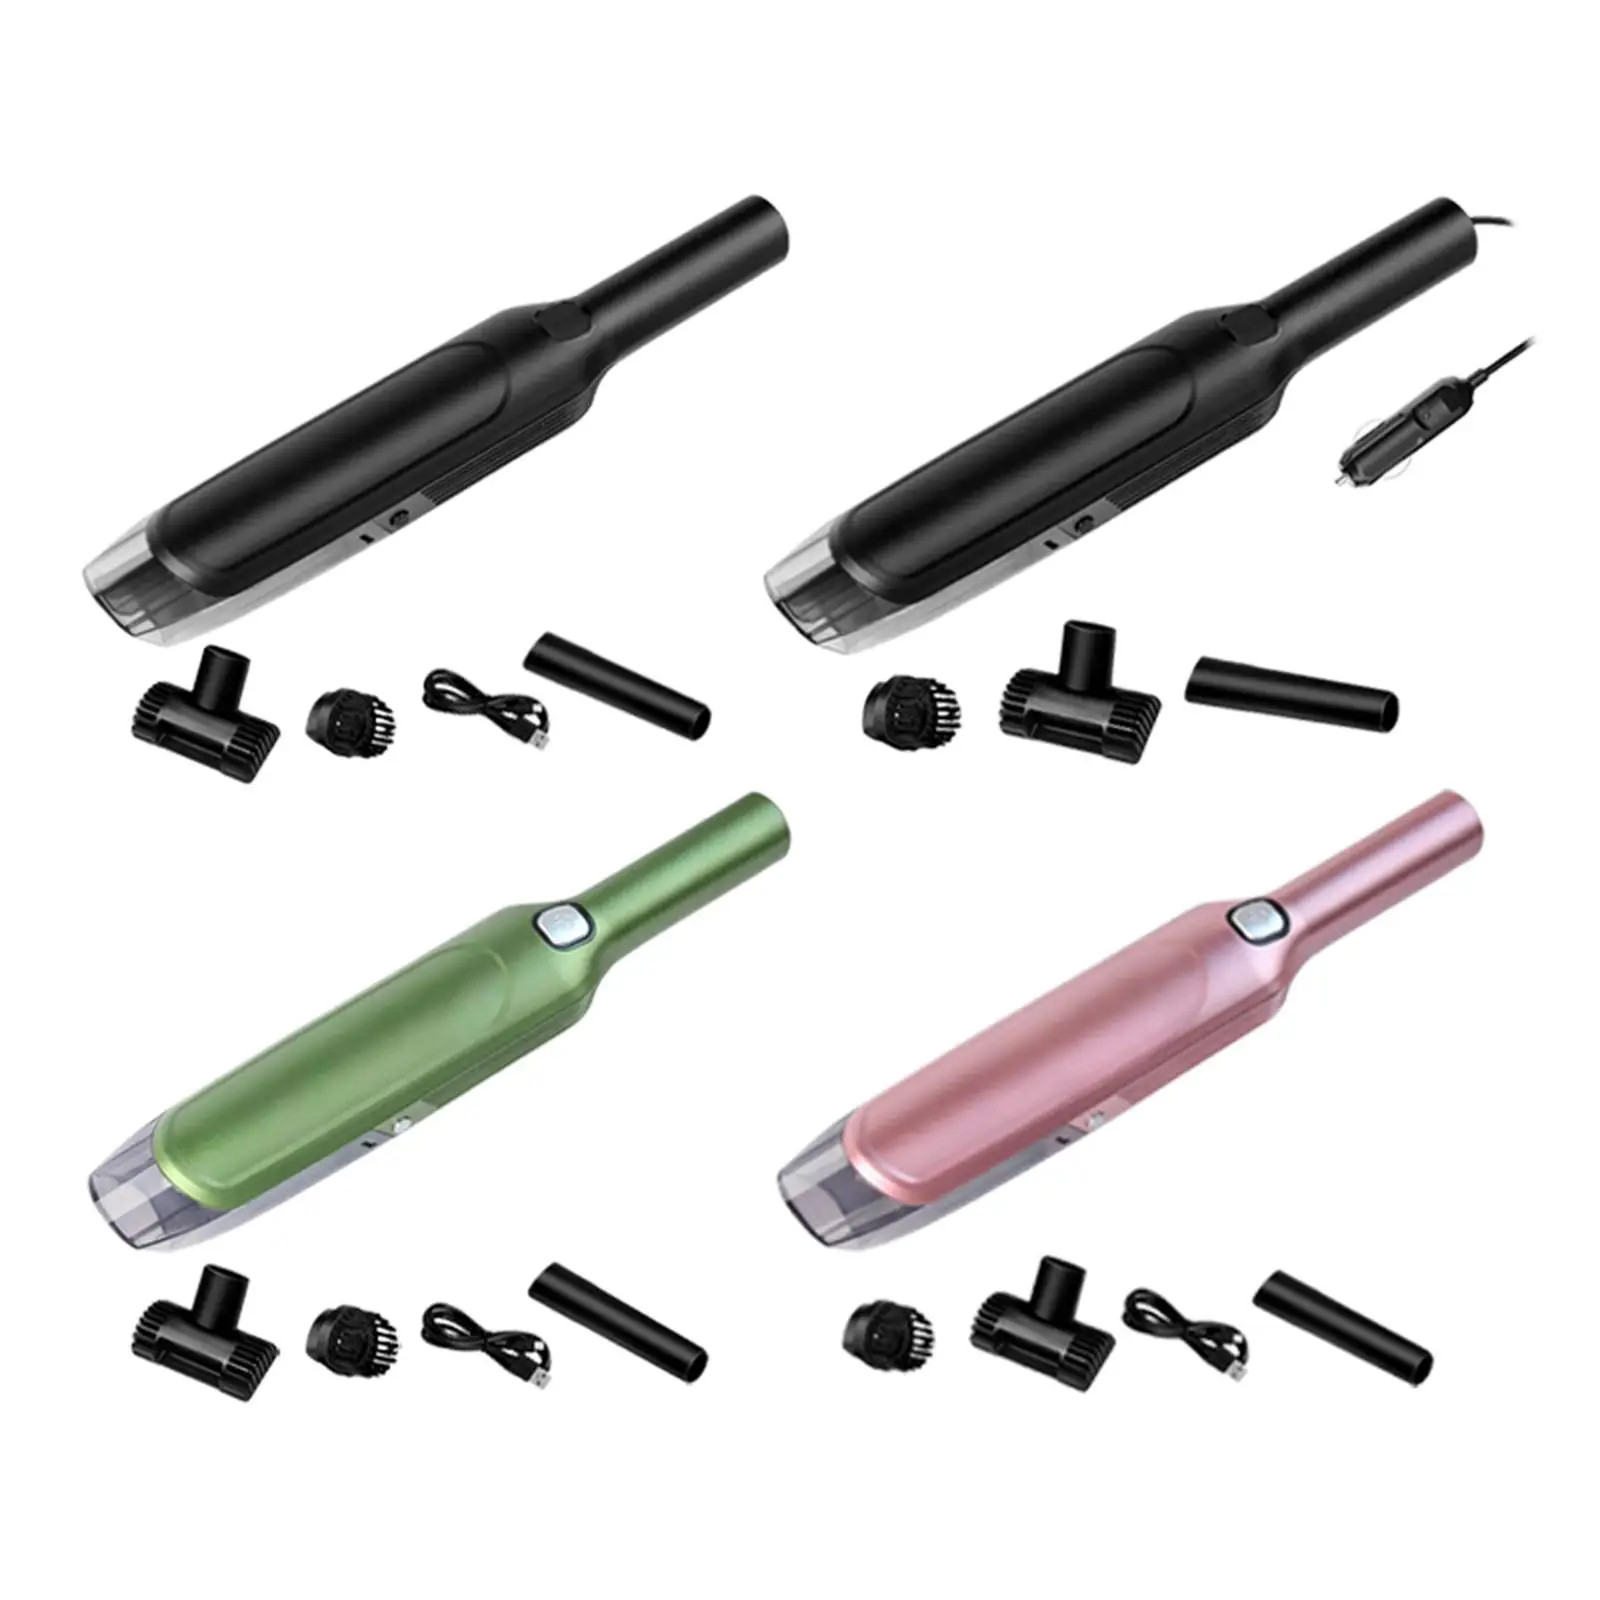 Portable Car Vacuum Cleaner 4000mAh Battery USB Rechargeable Dust